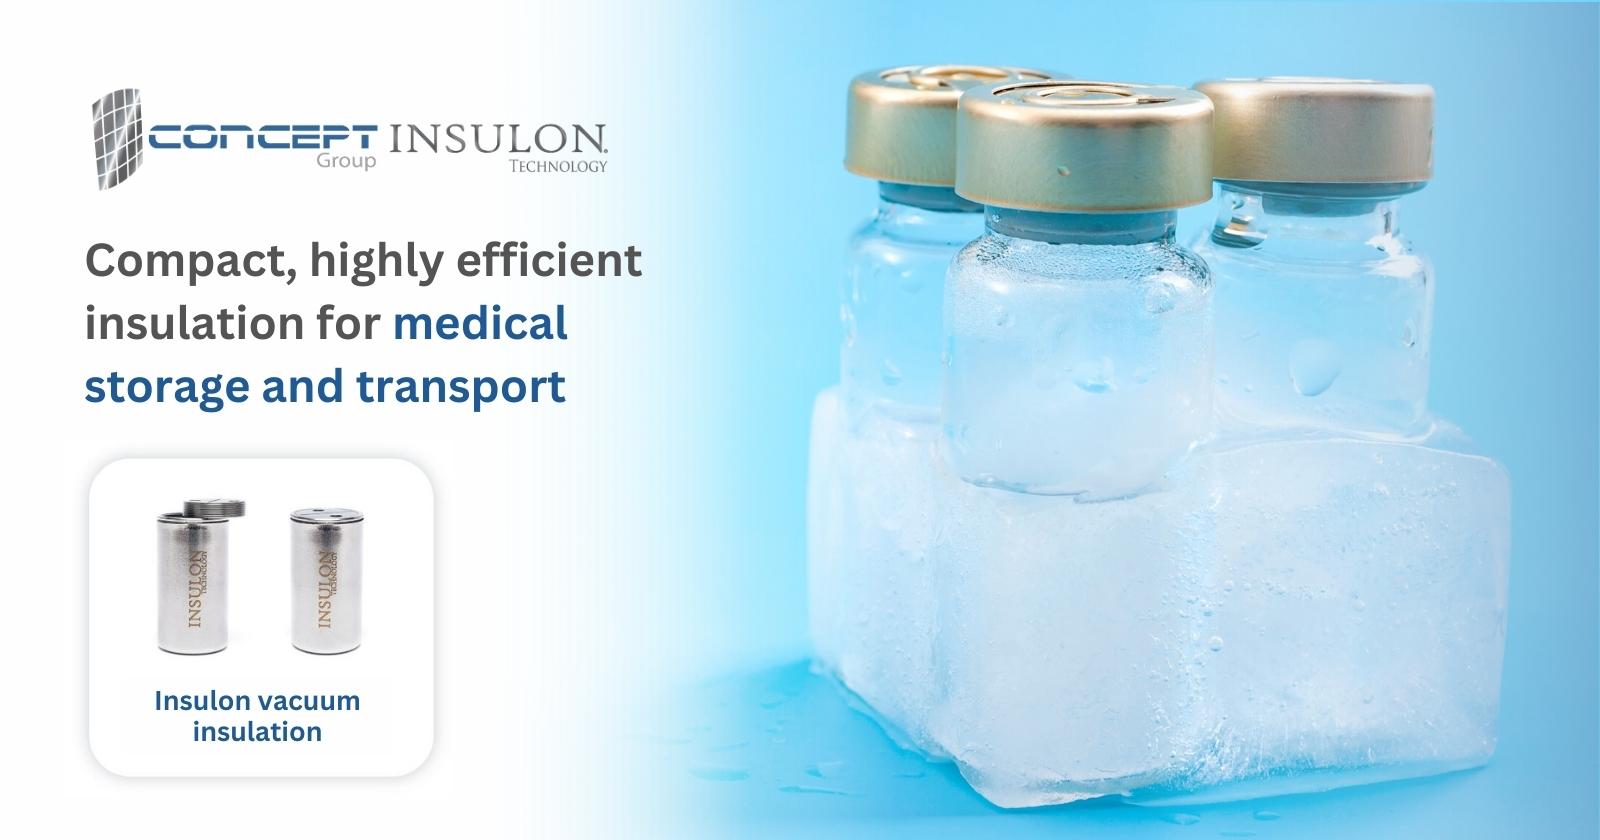 Compact, highly efficient insulation for biomedical and pharmaceutical storage and transport